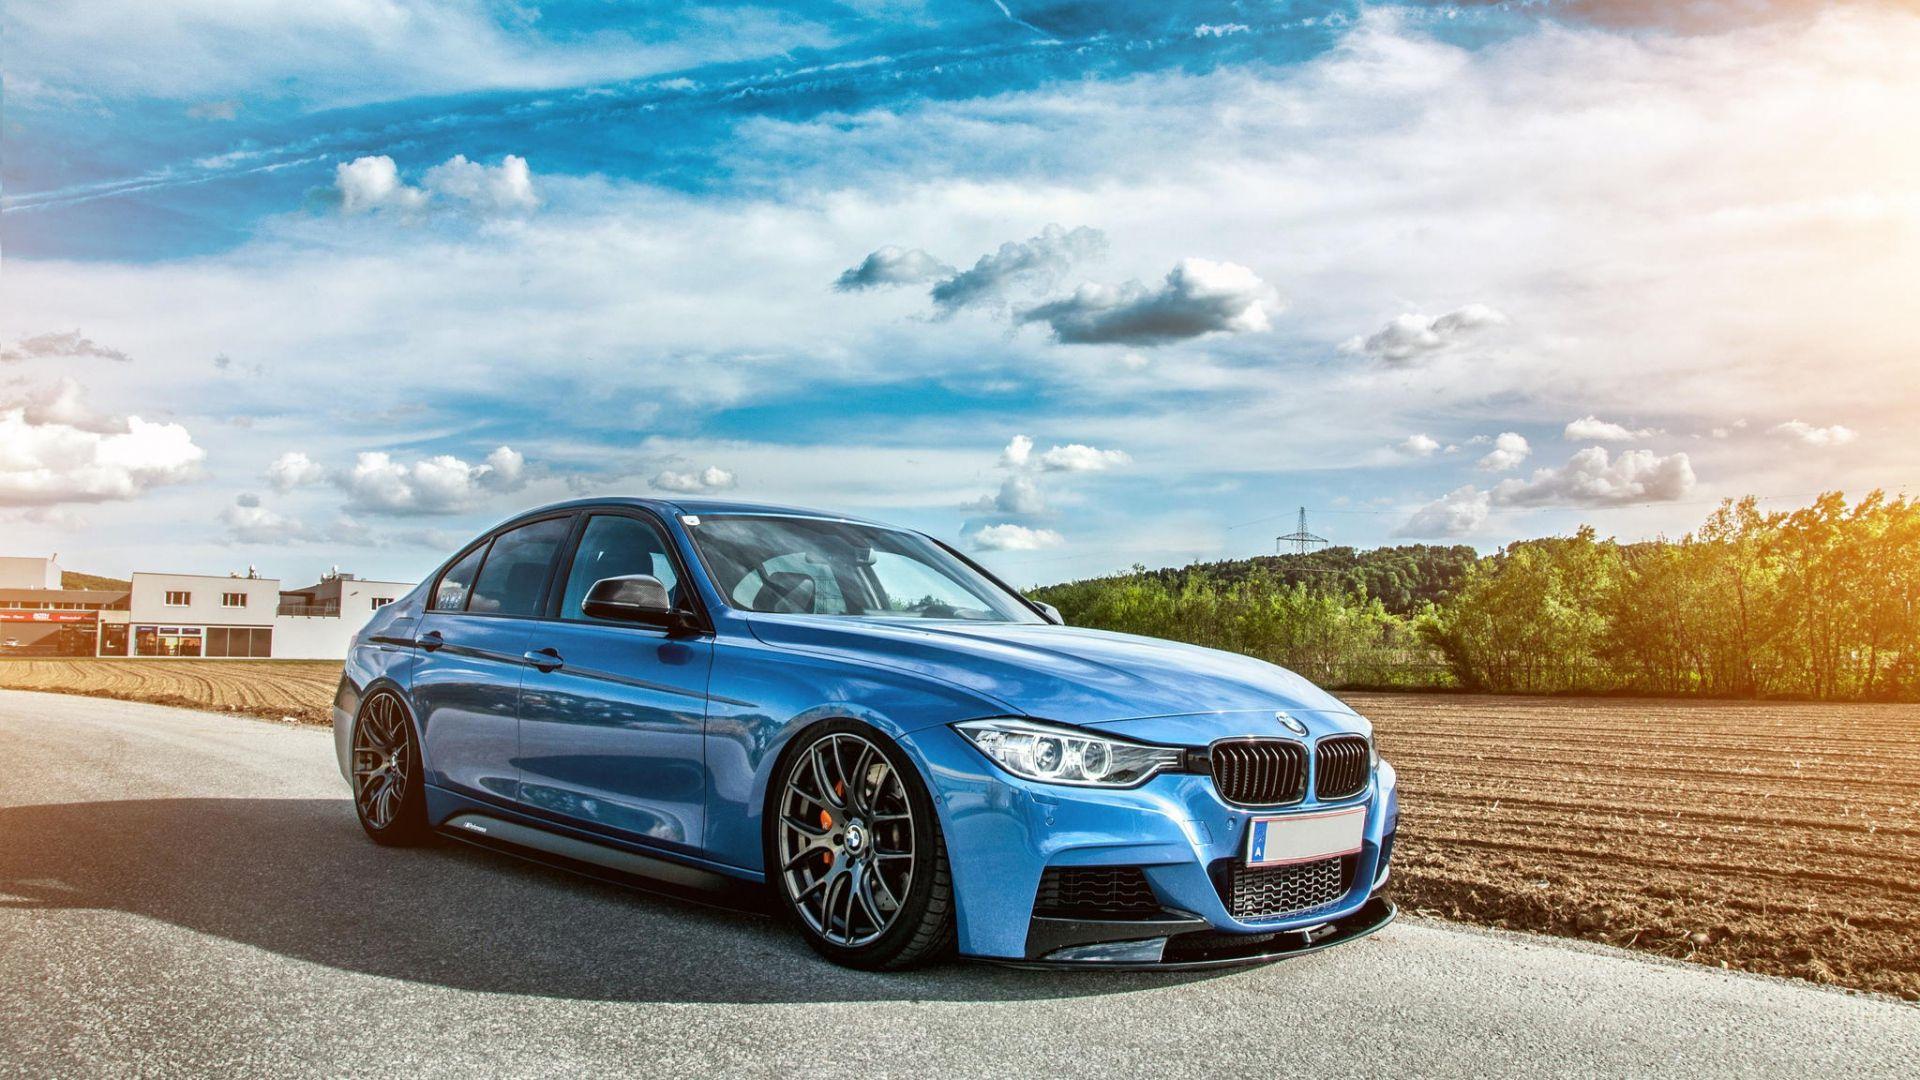 Background Full HD P Cars Desktop S On Car Bmw Of Smartphone Tuning